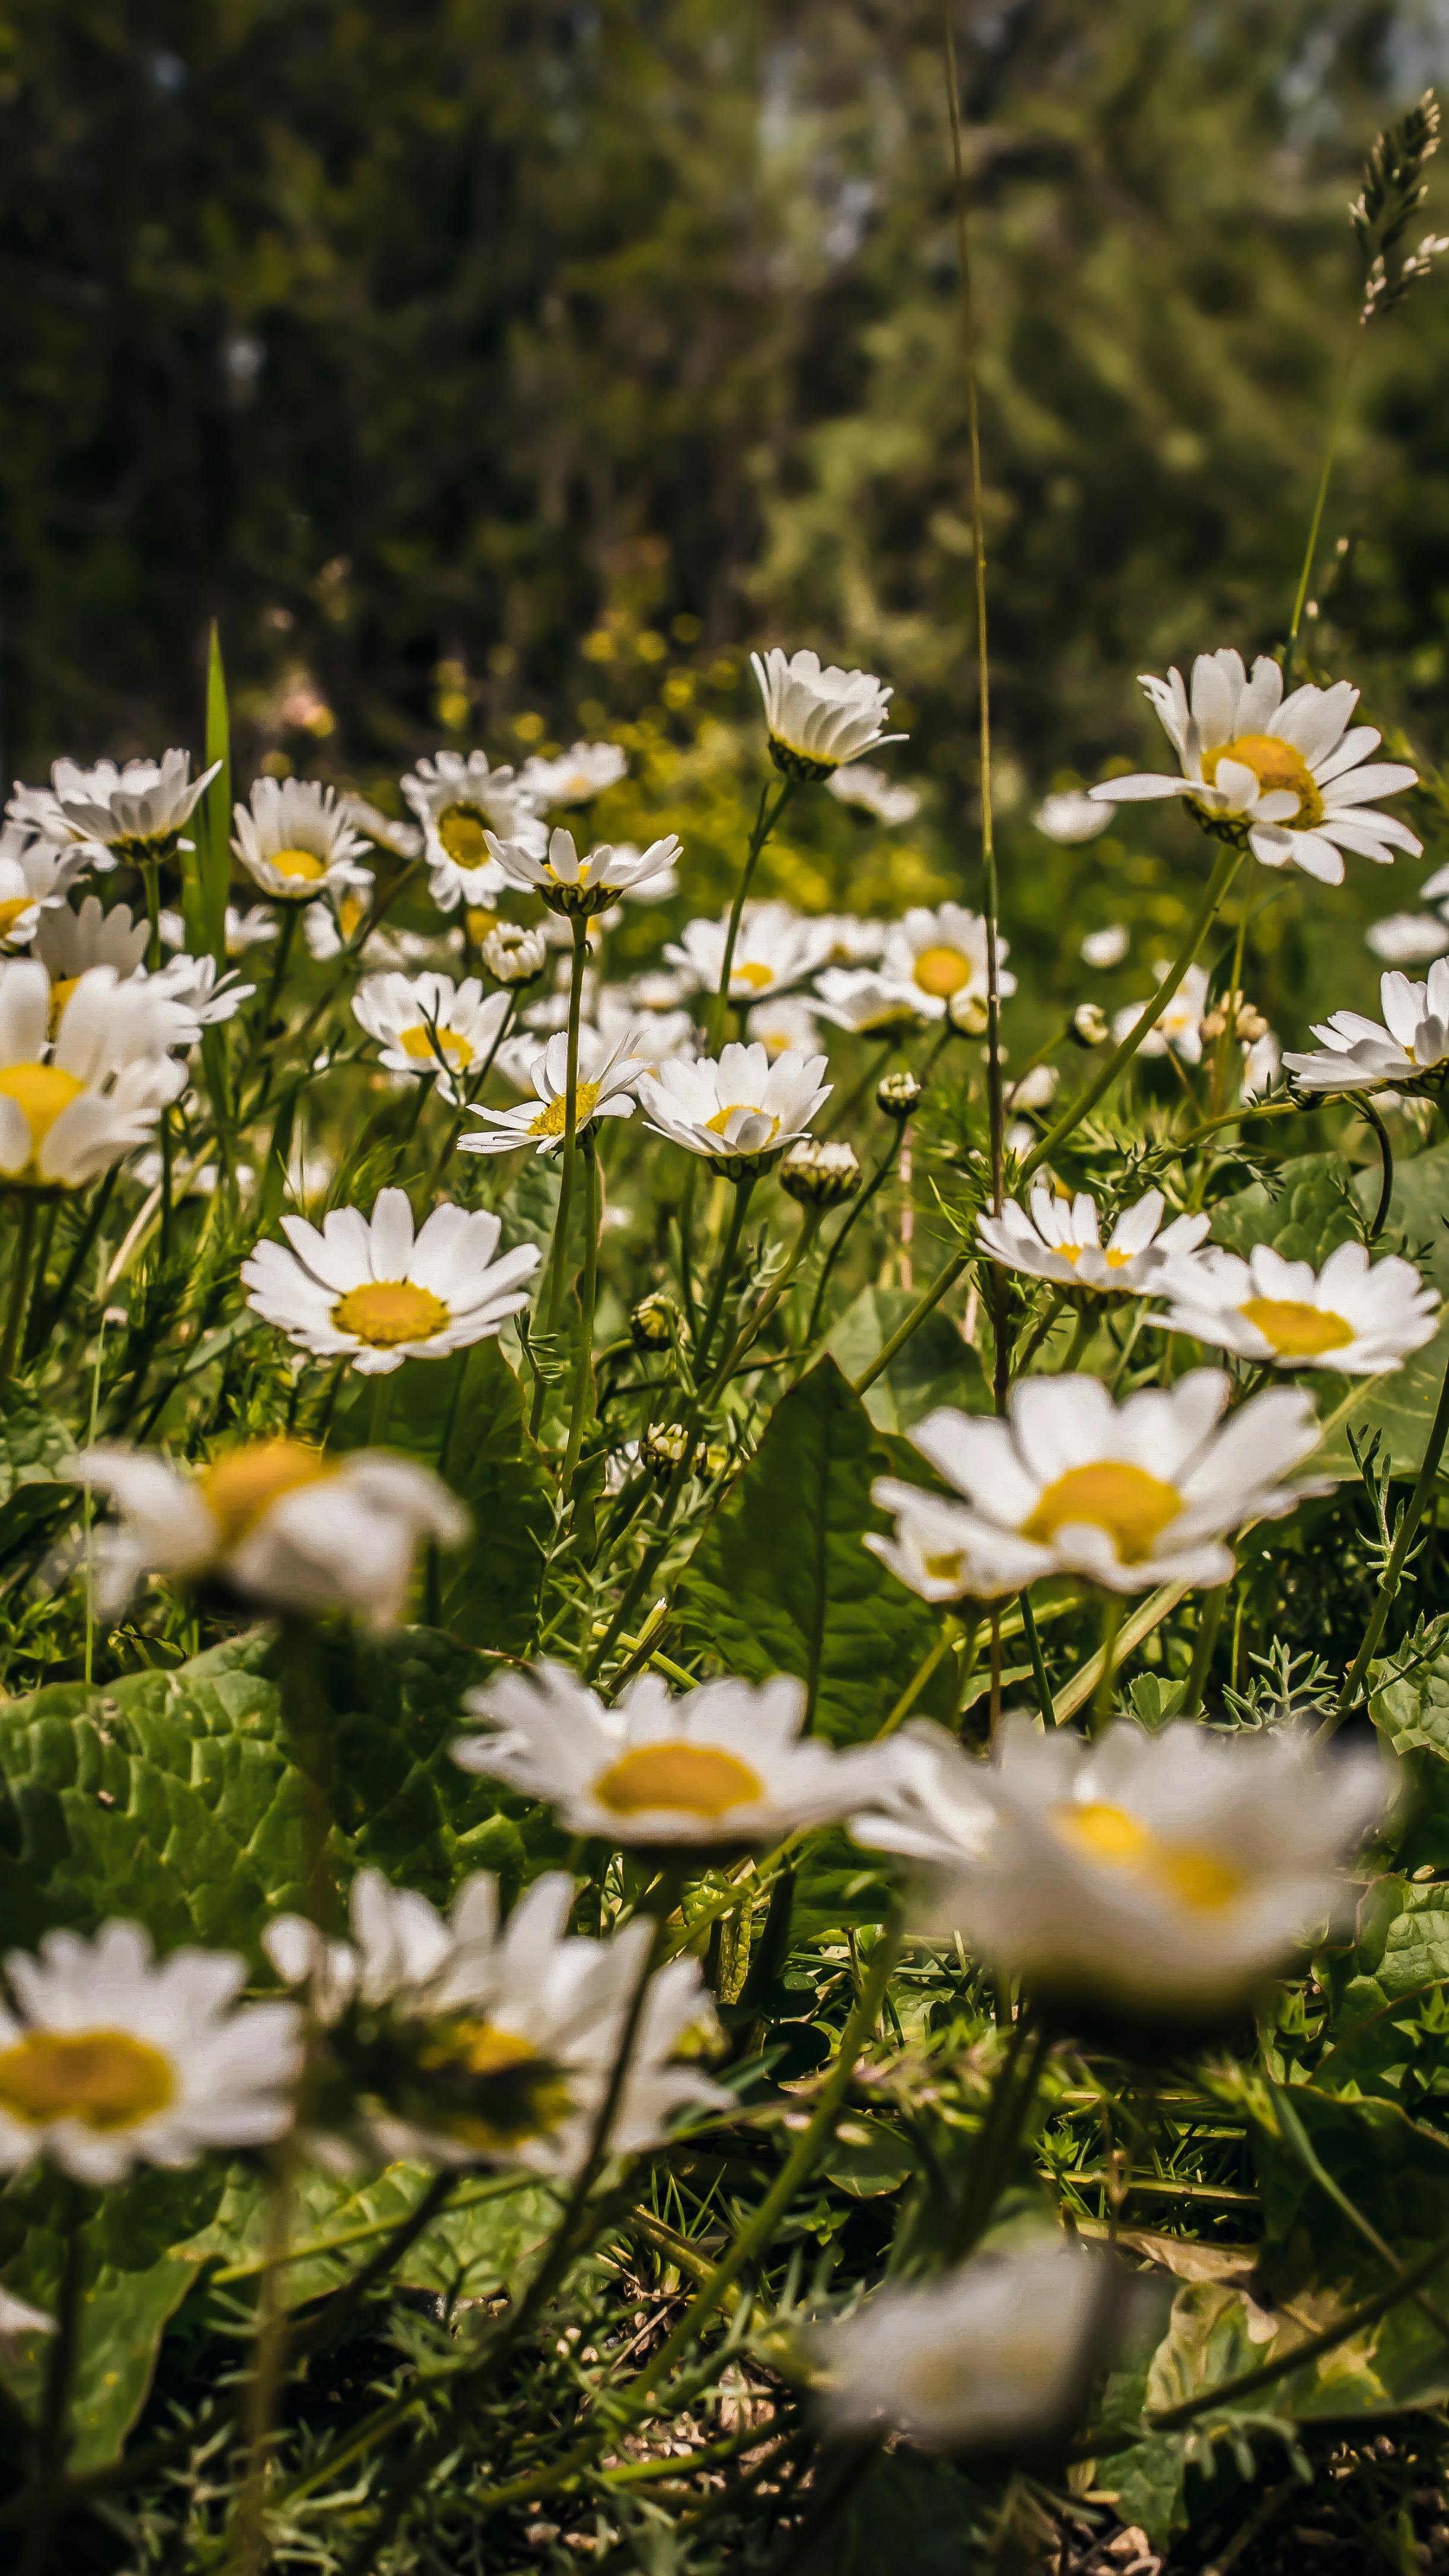 Daisy Aesthetic Wallpapers  Wallpaper Cave